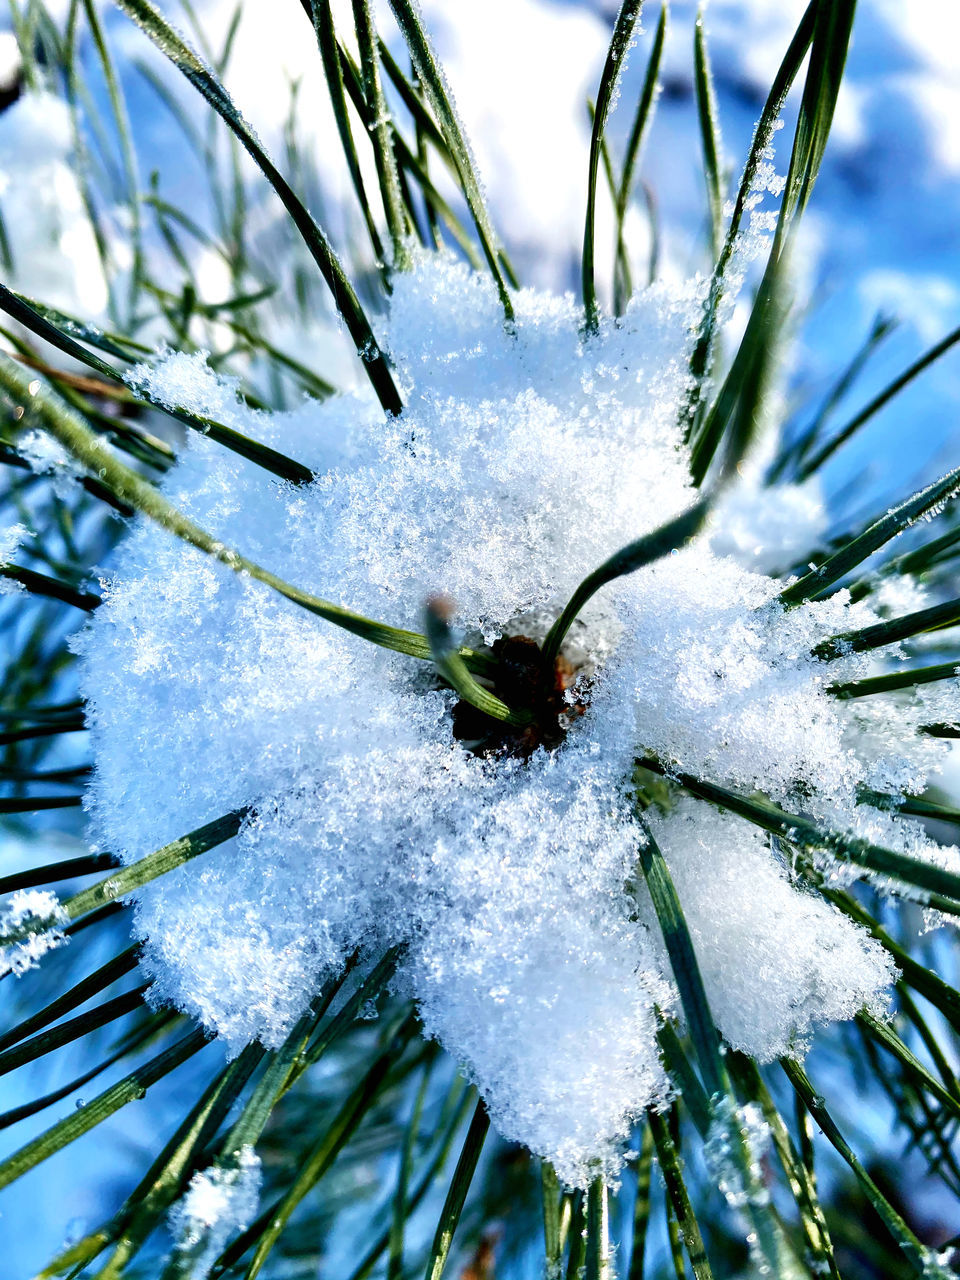 branch, tree, frost, plant, snow, cold temperature, nature, winter, flower, close-up, no people, beauty in nature, growth, frozen, day, macro photography, coniferous tree, outdoors, twig, pine tree, white, ice, focus on foreground, pinaceae, leaf, green, fir, freezing, freshness